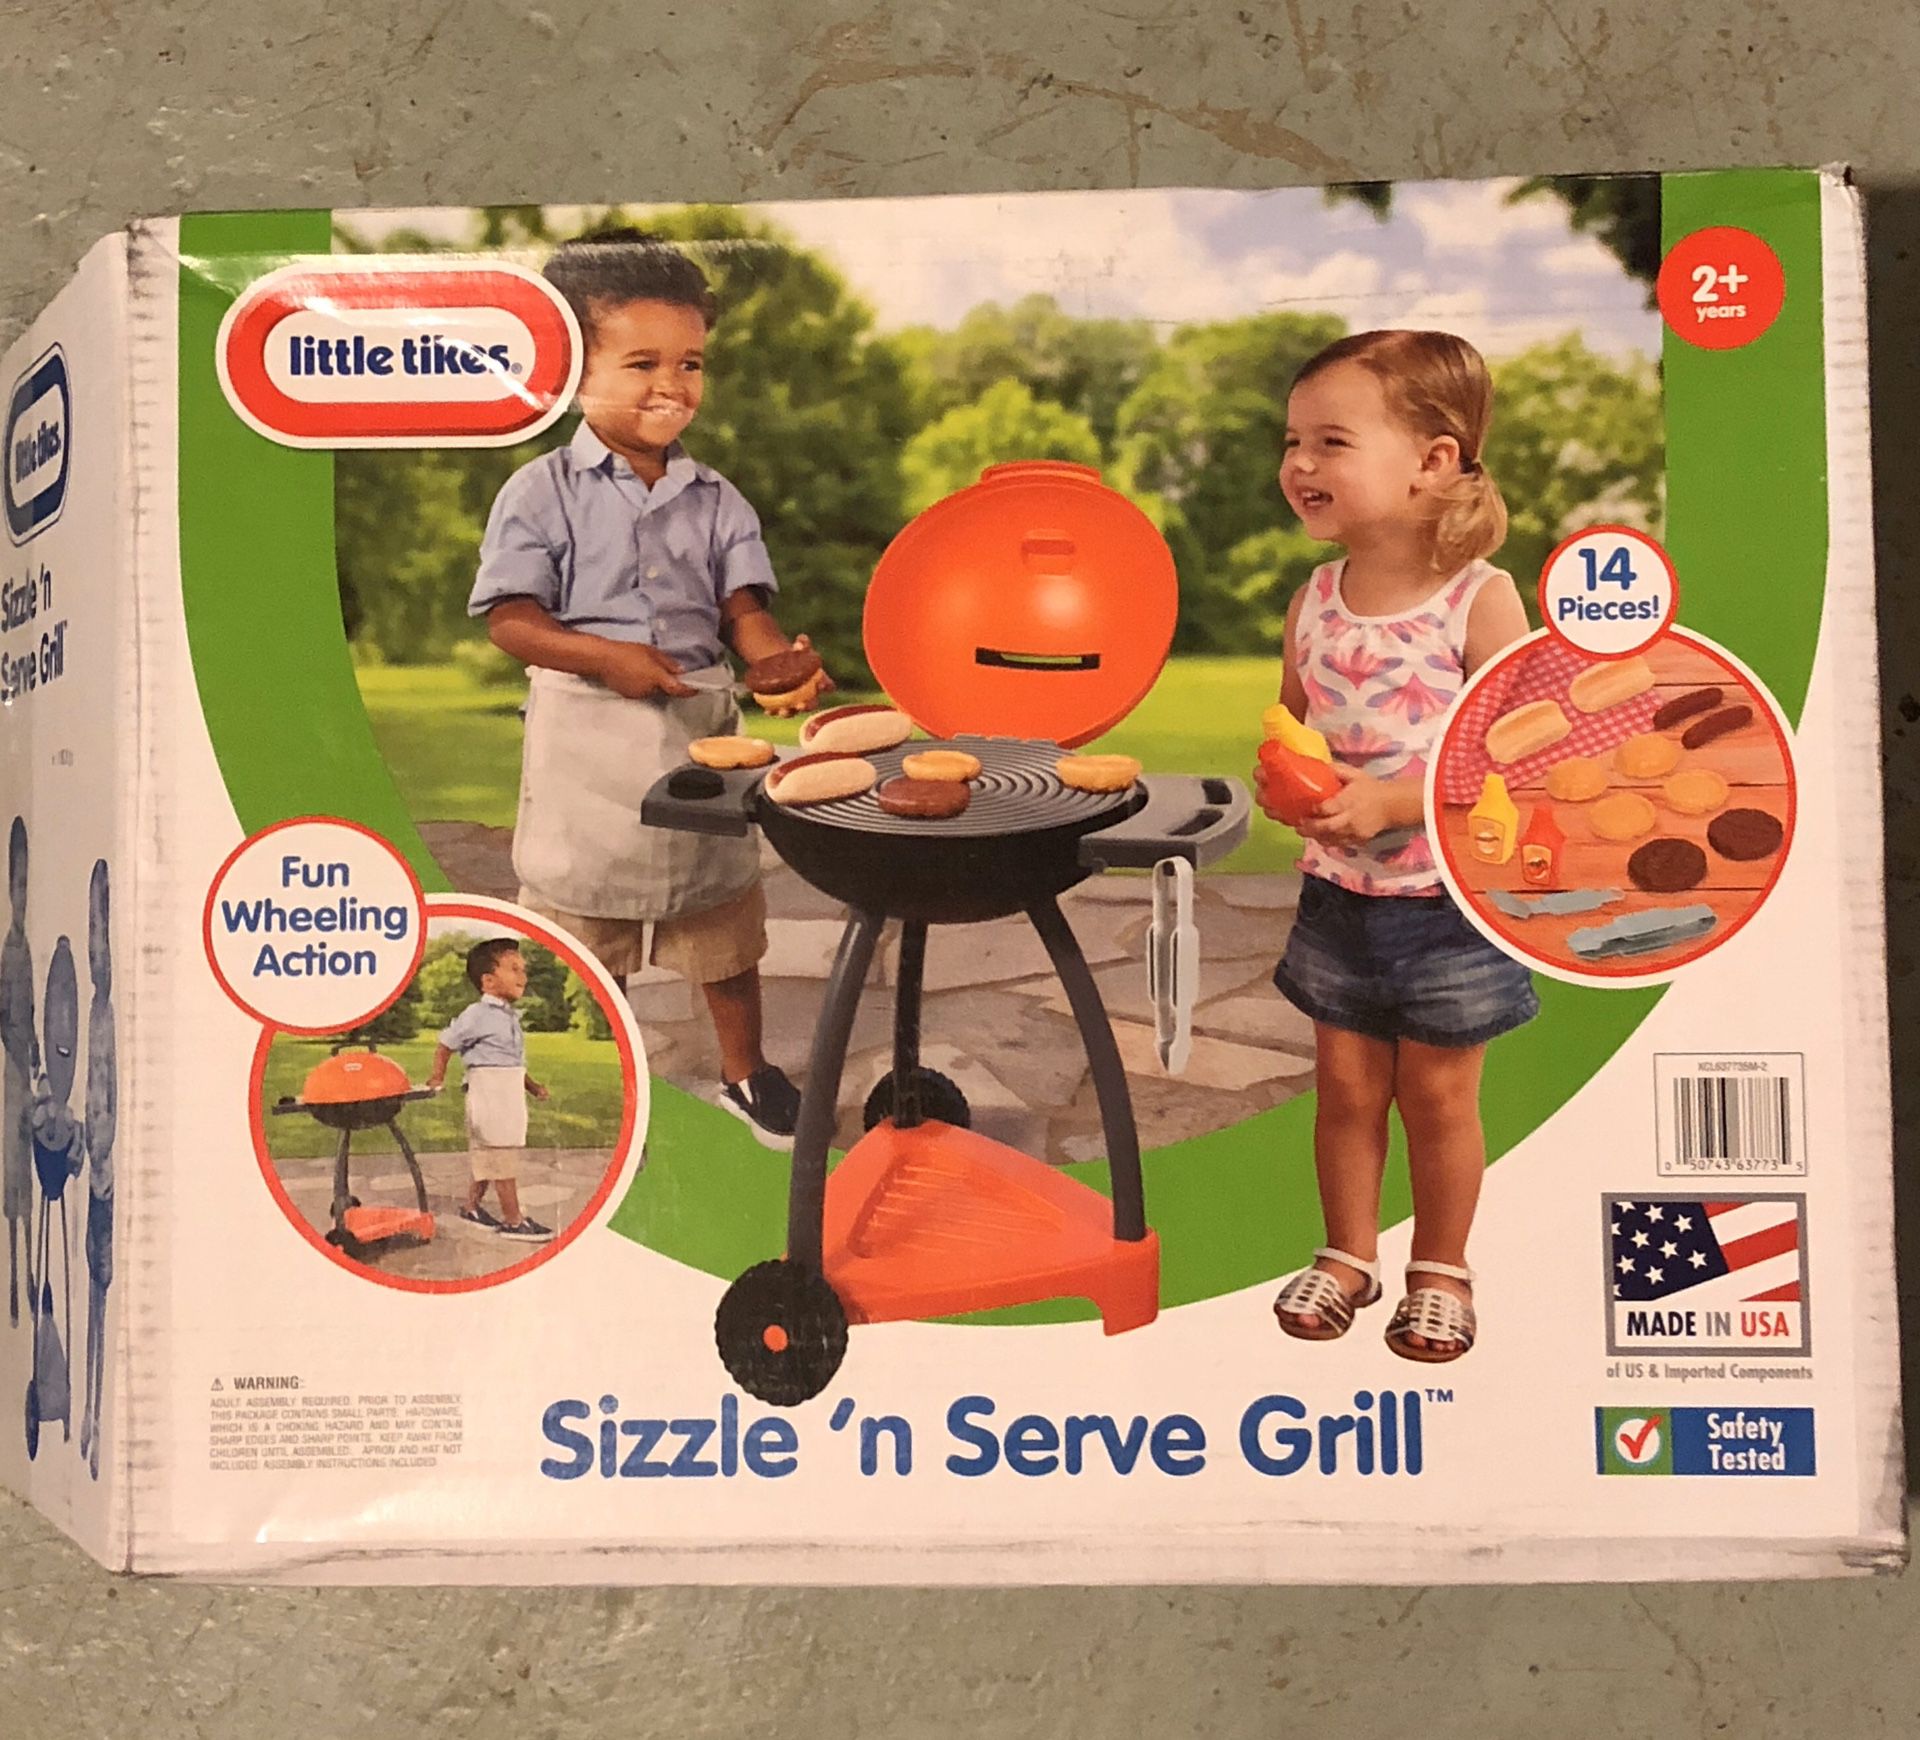 Little tikes Sizzle and Serves kids barbecue toy set pickup in Elizabeth today